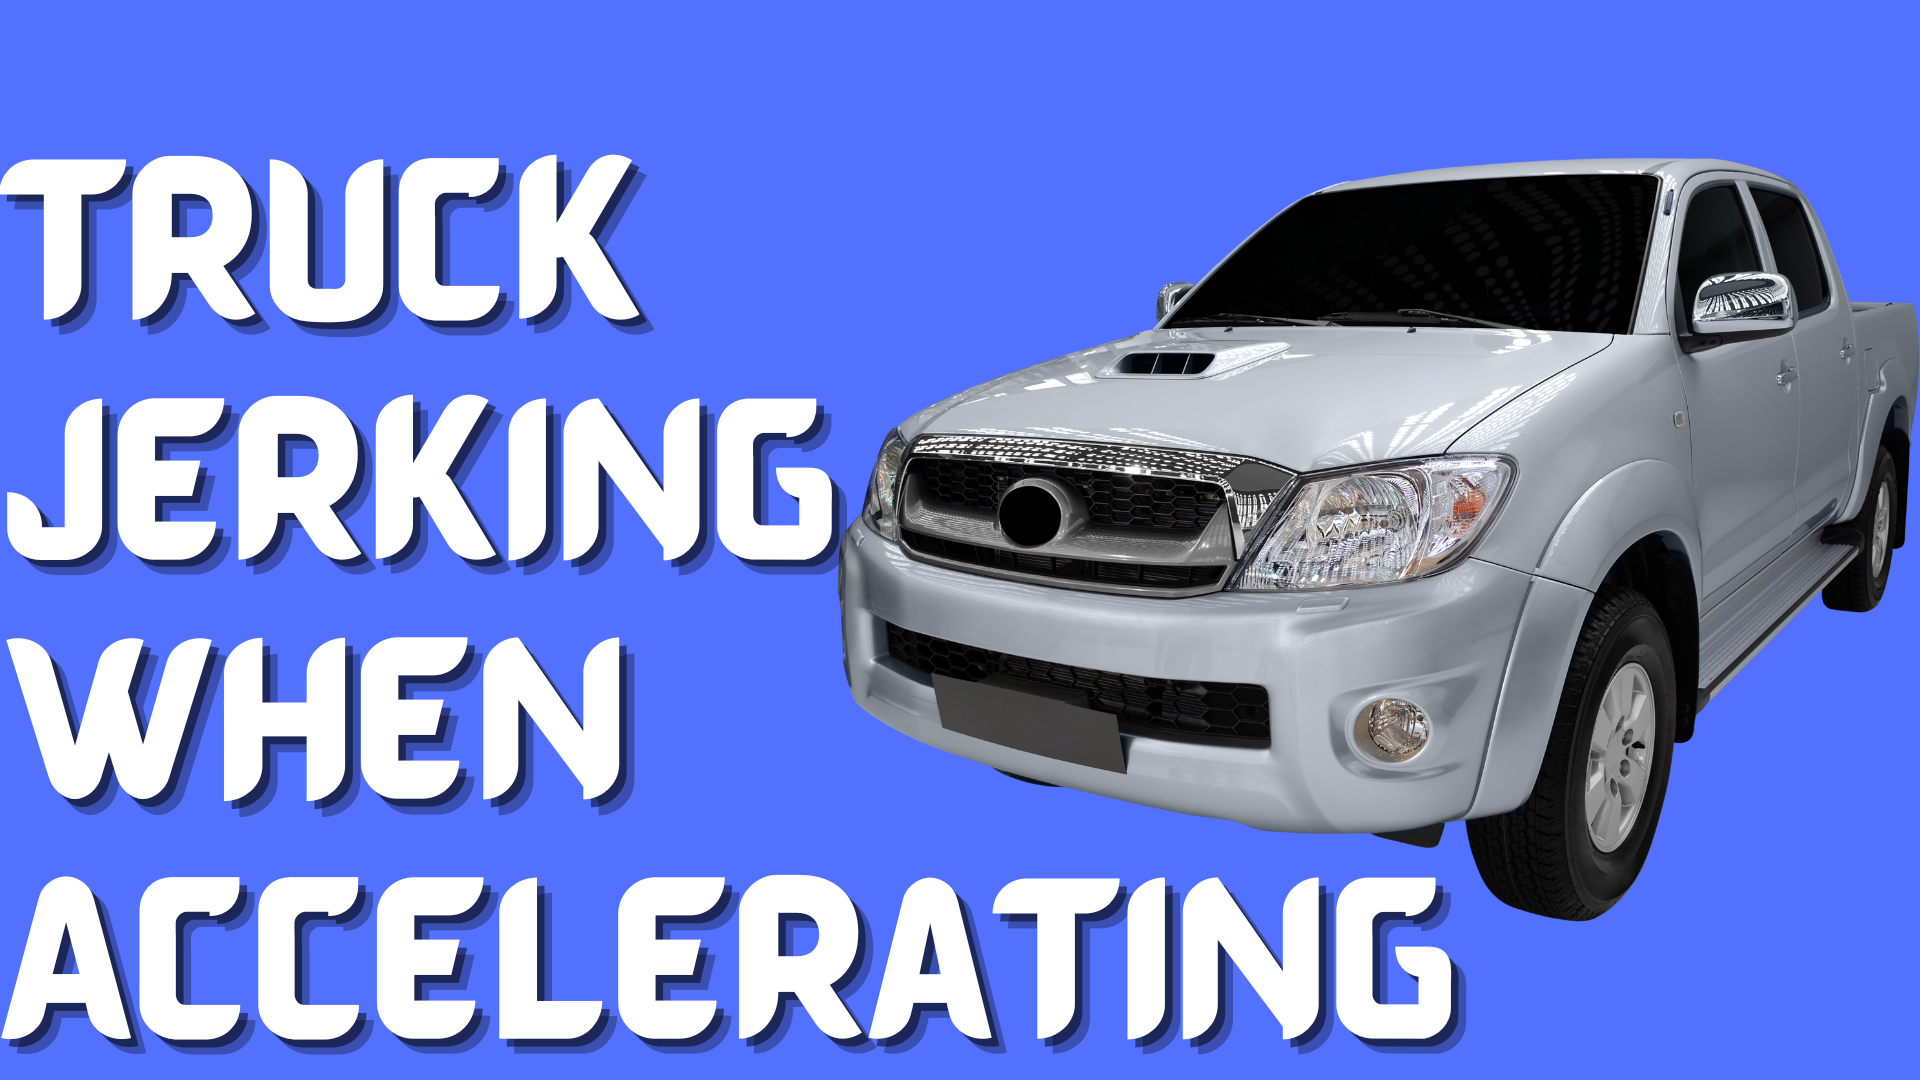 Causes of Truck Jerking When Accelerating